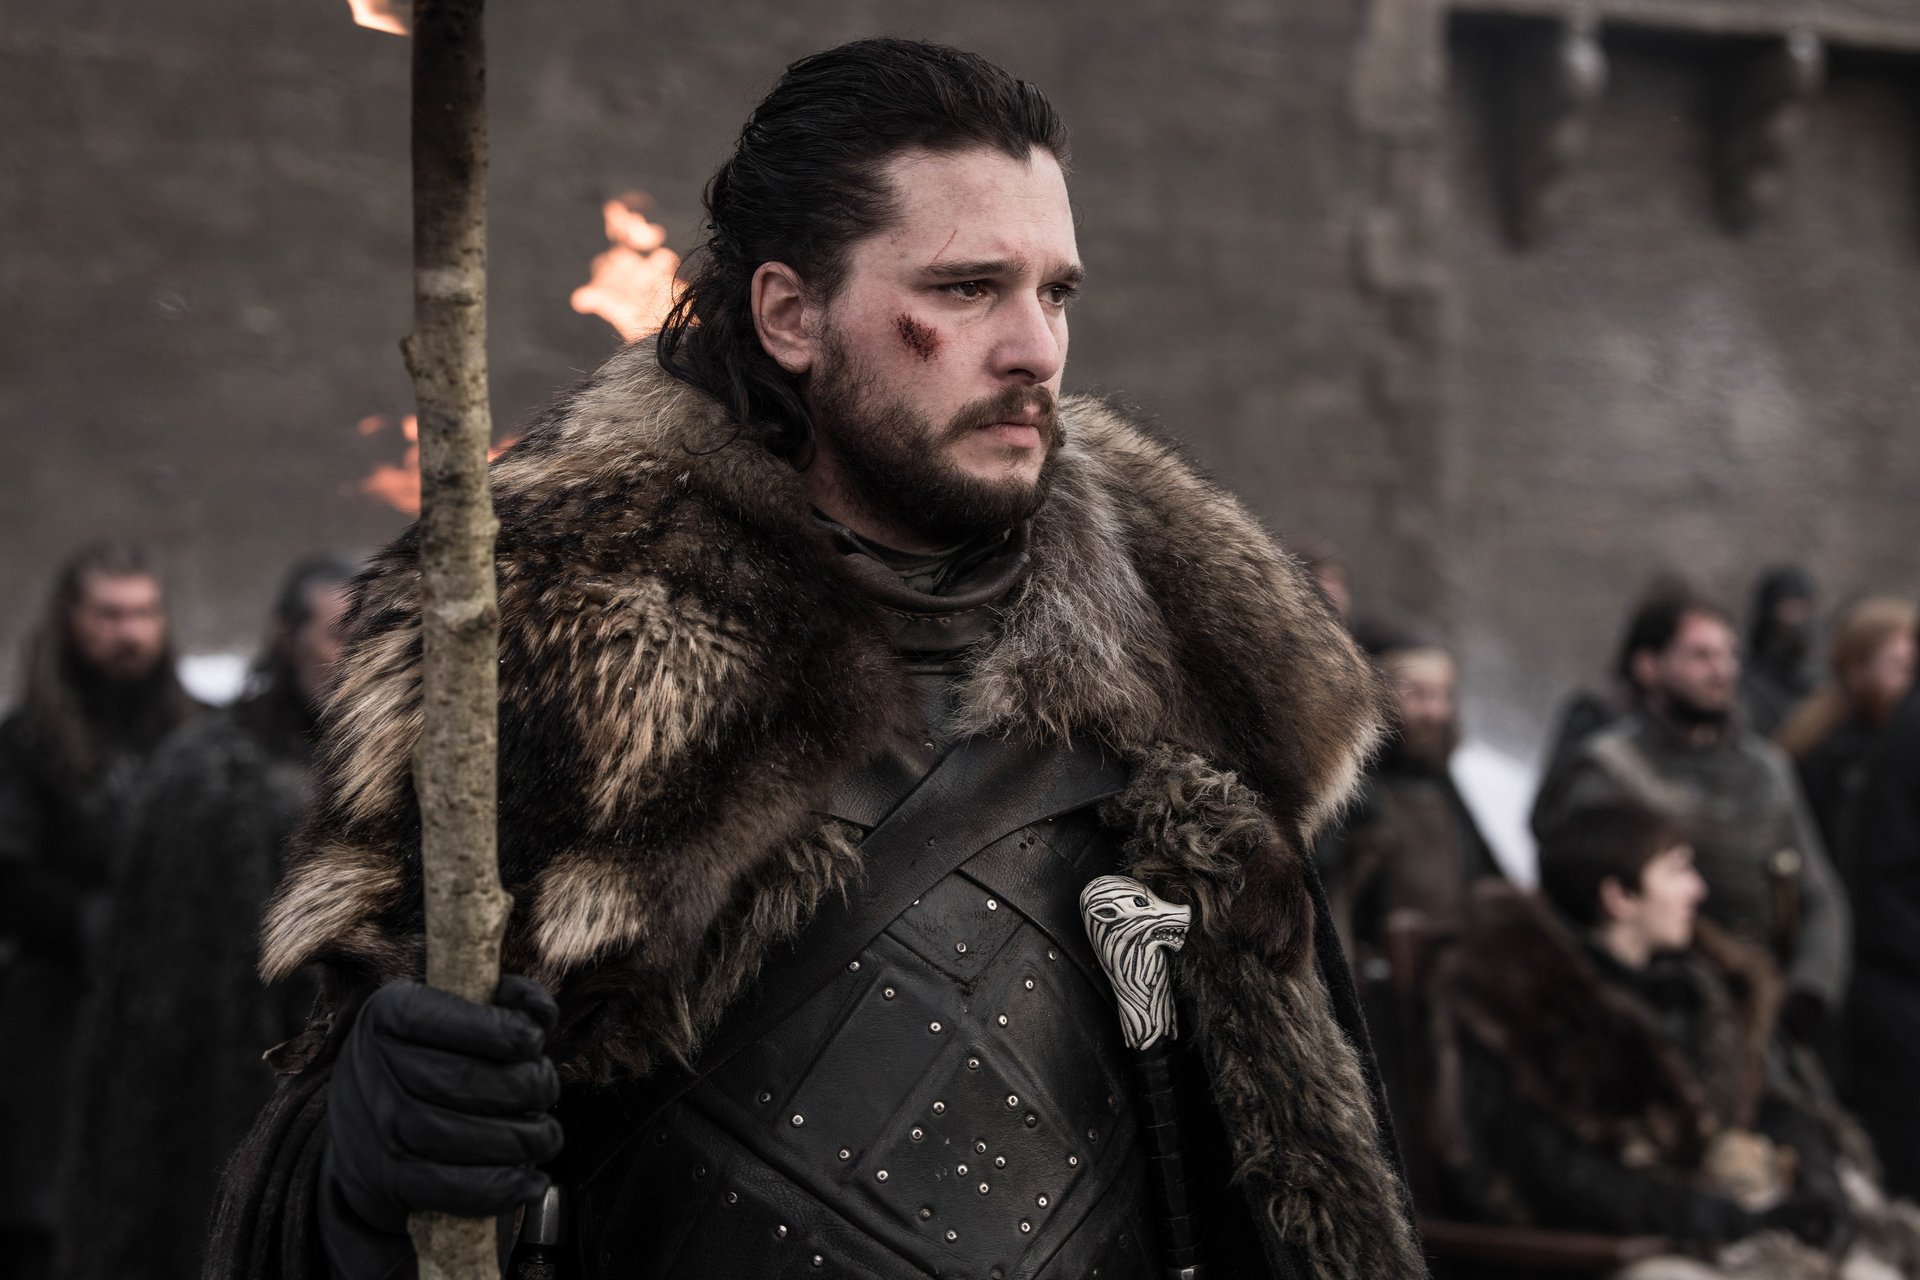 Kit Harington as Jon Snow, who will receive his own 'Game of Thrones' spinoff. In the photo, he's wearing a fur cloak and standing in front of people while holding a torch.